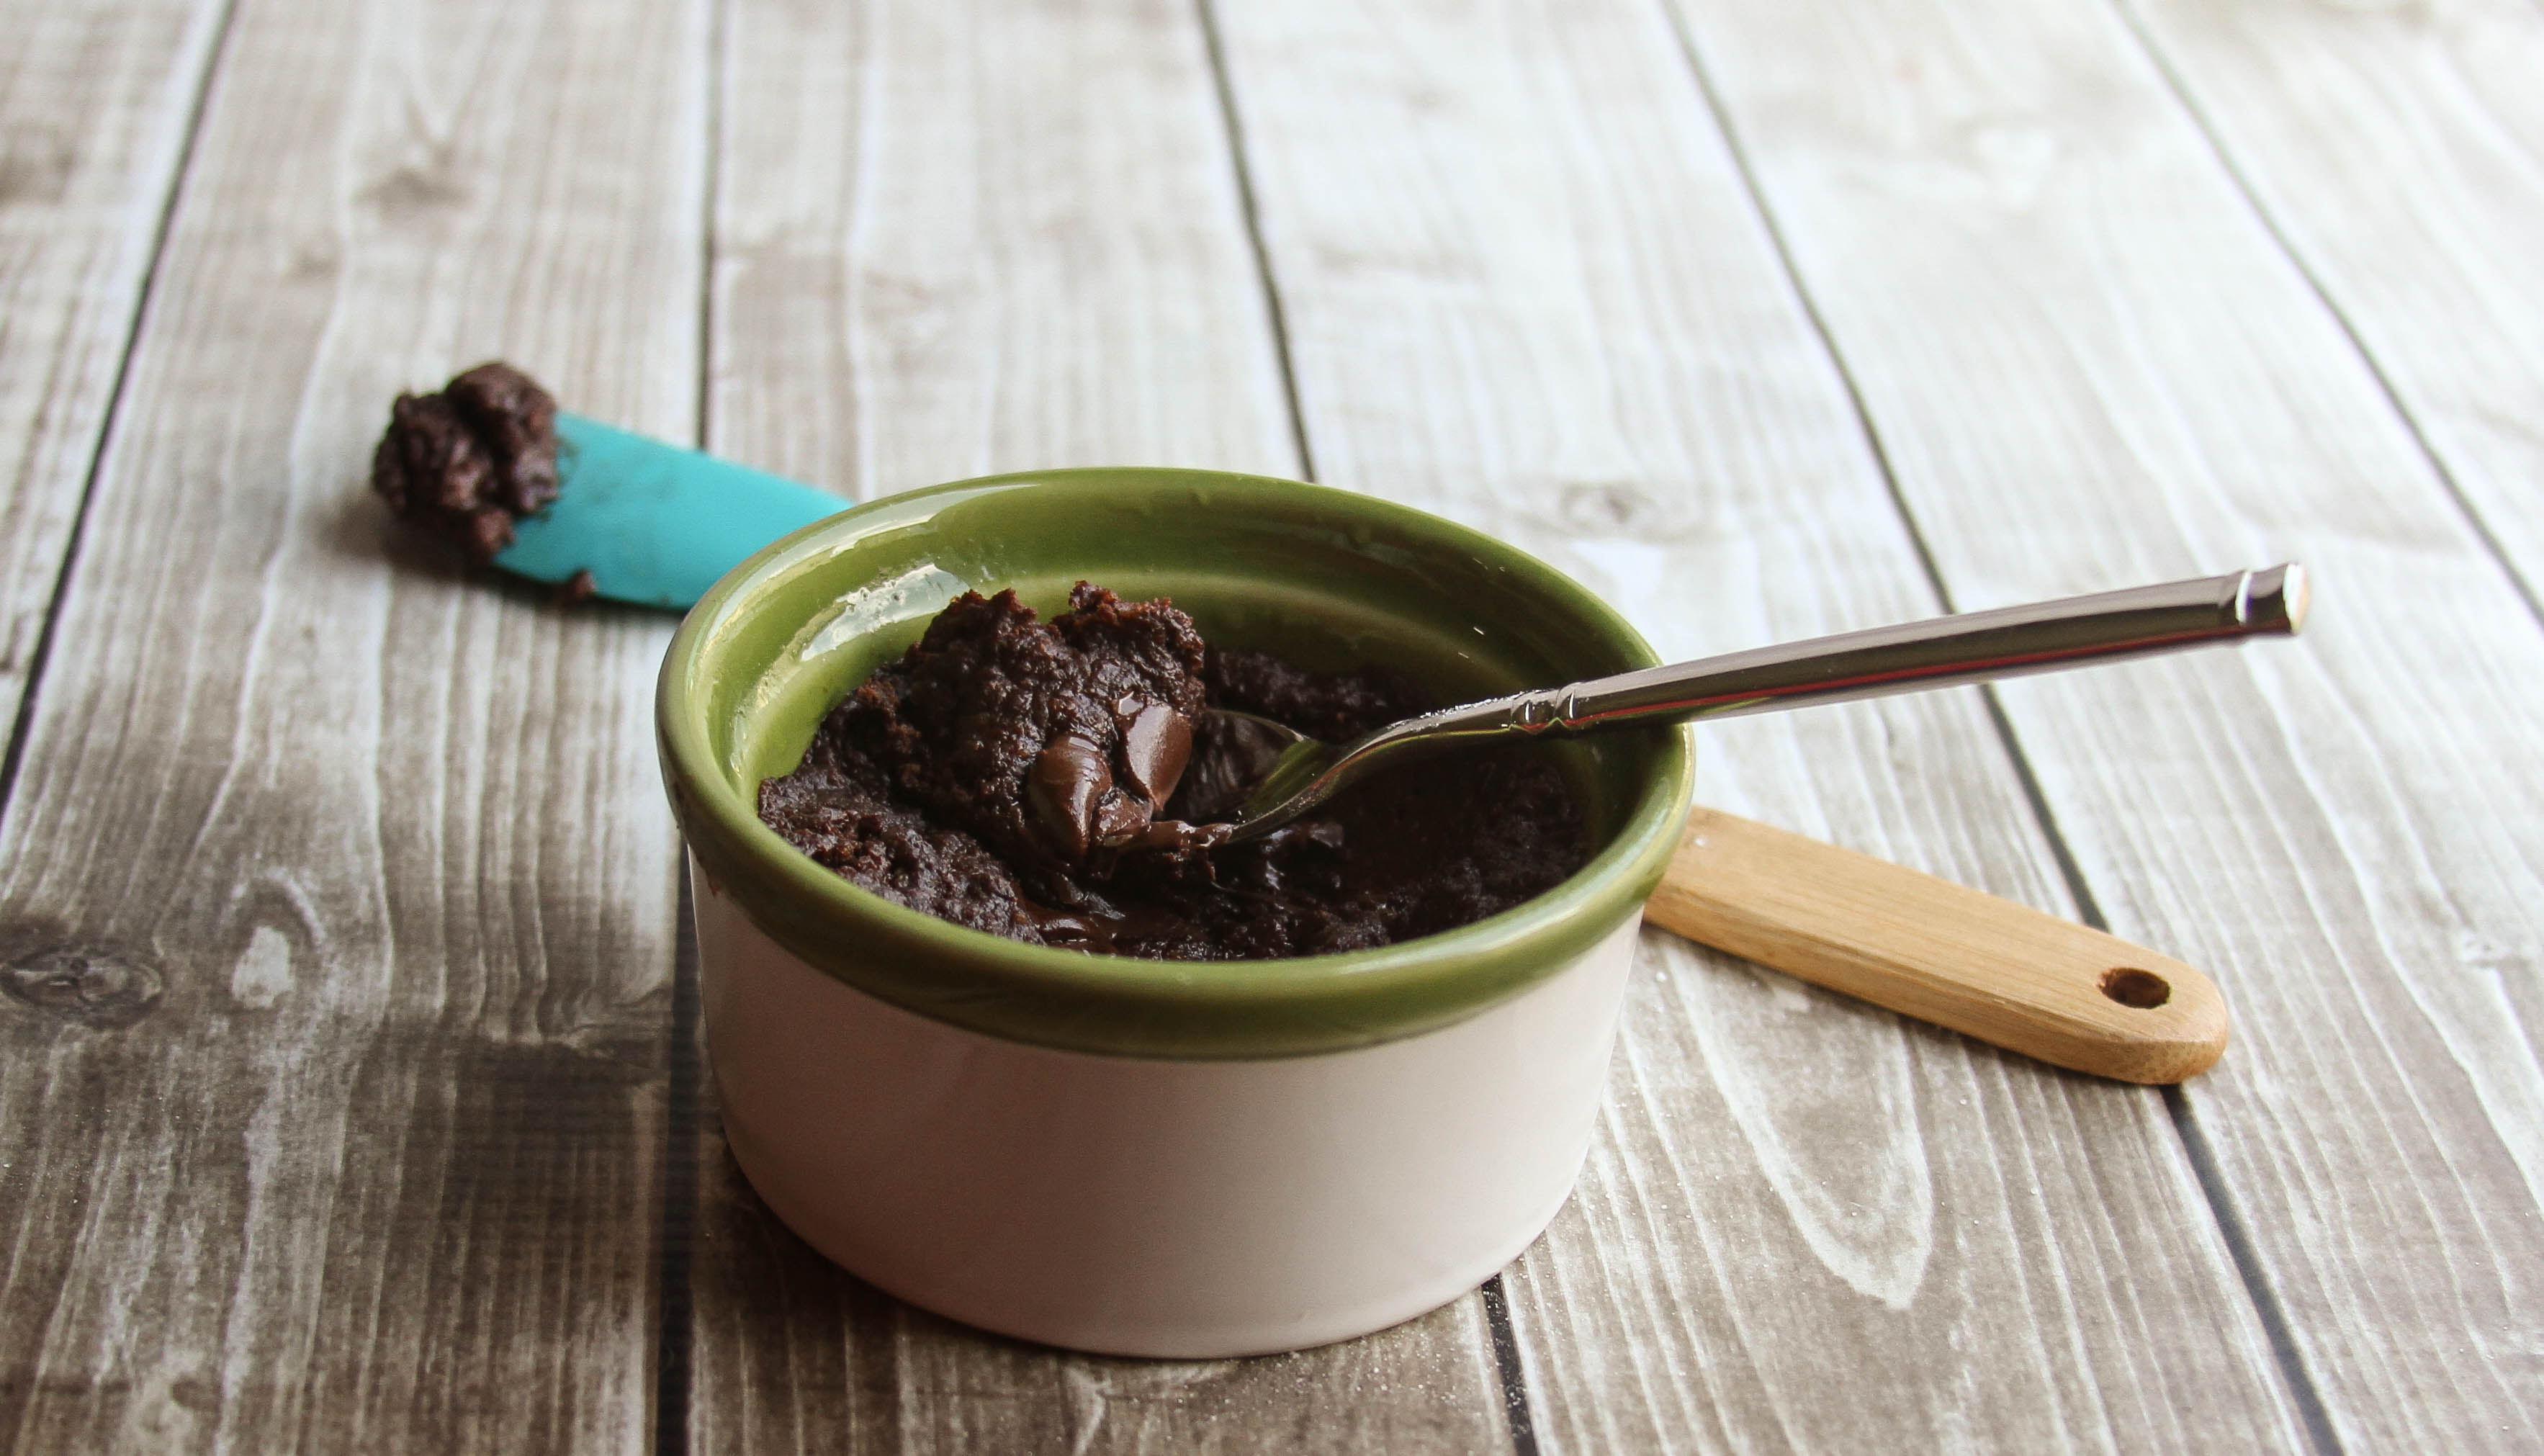 Brownie Batter in a Mug - Part of an Ultimate List of over 100 Gluten-Free, Low-Carb Chocolate Recipes!